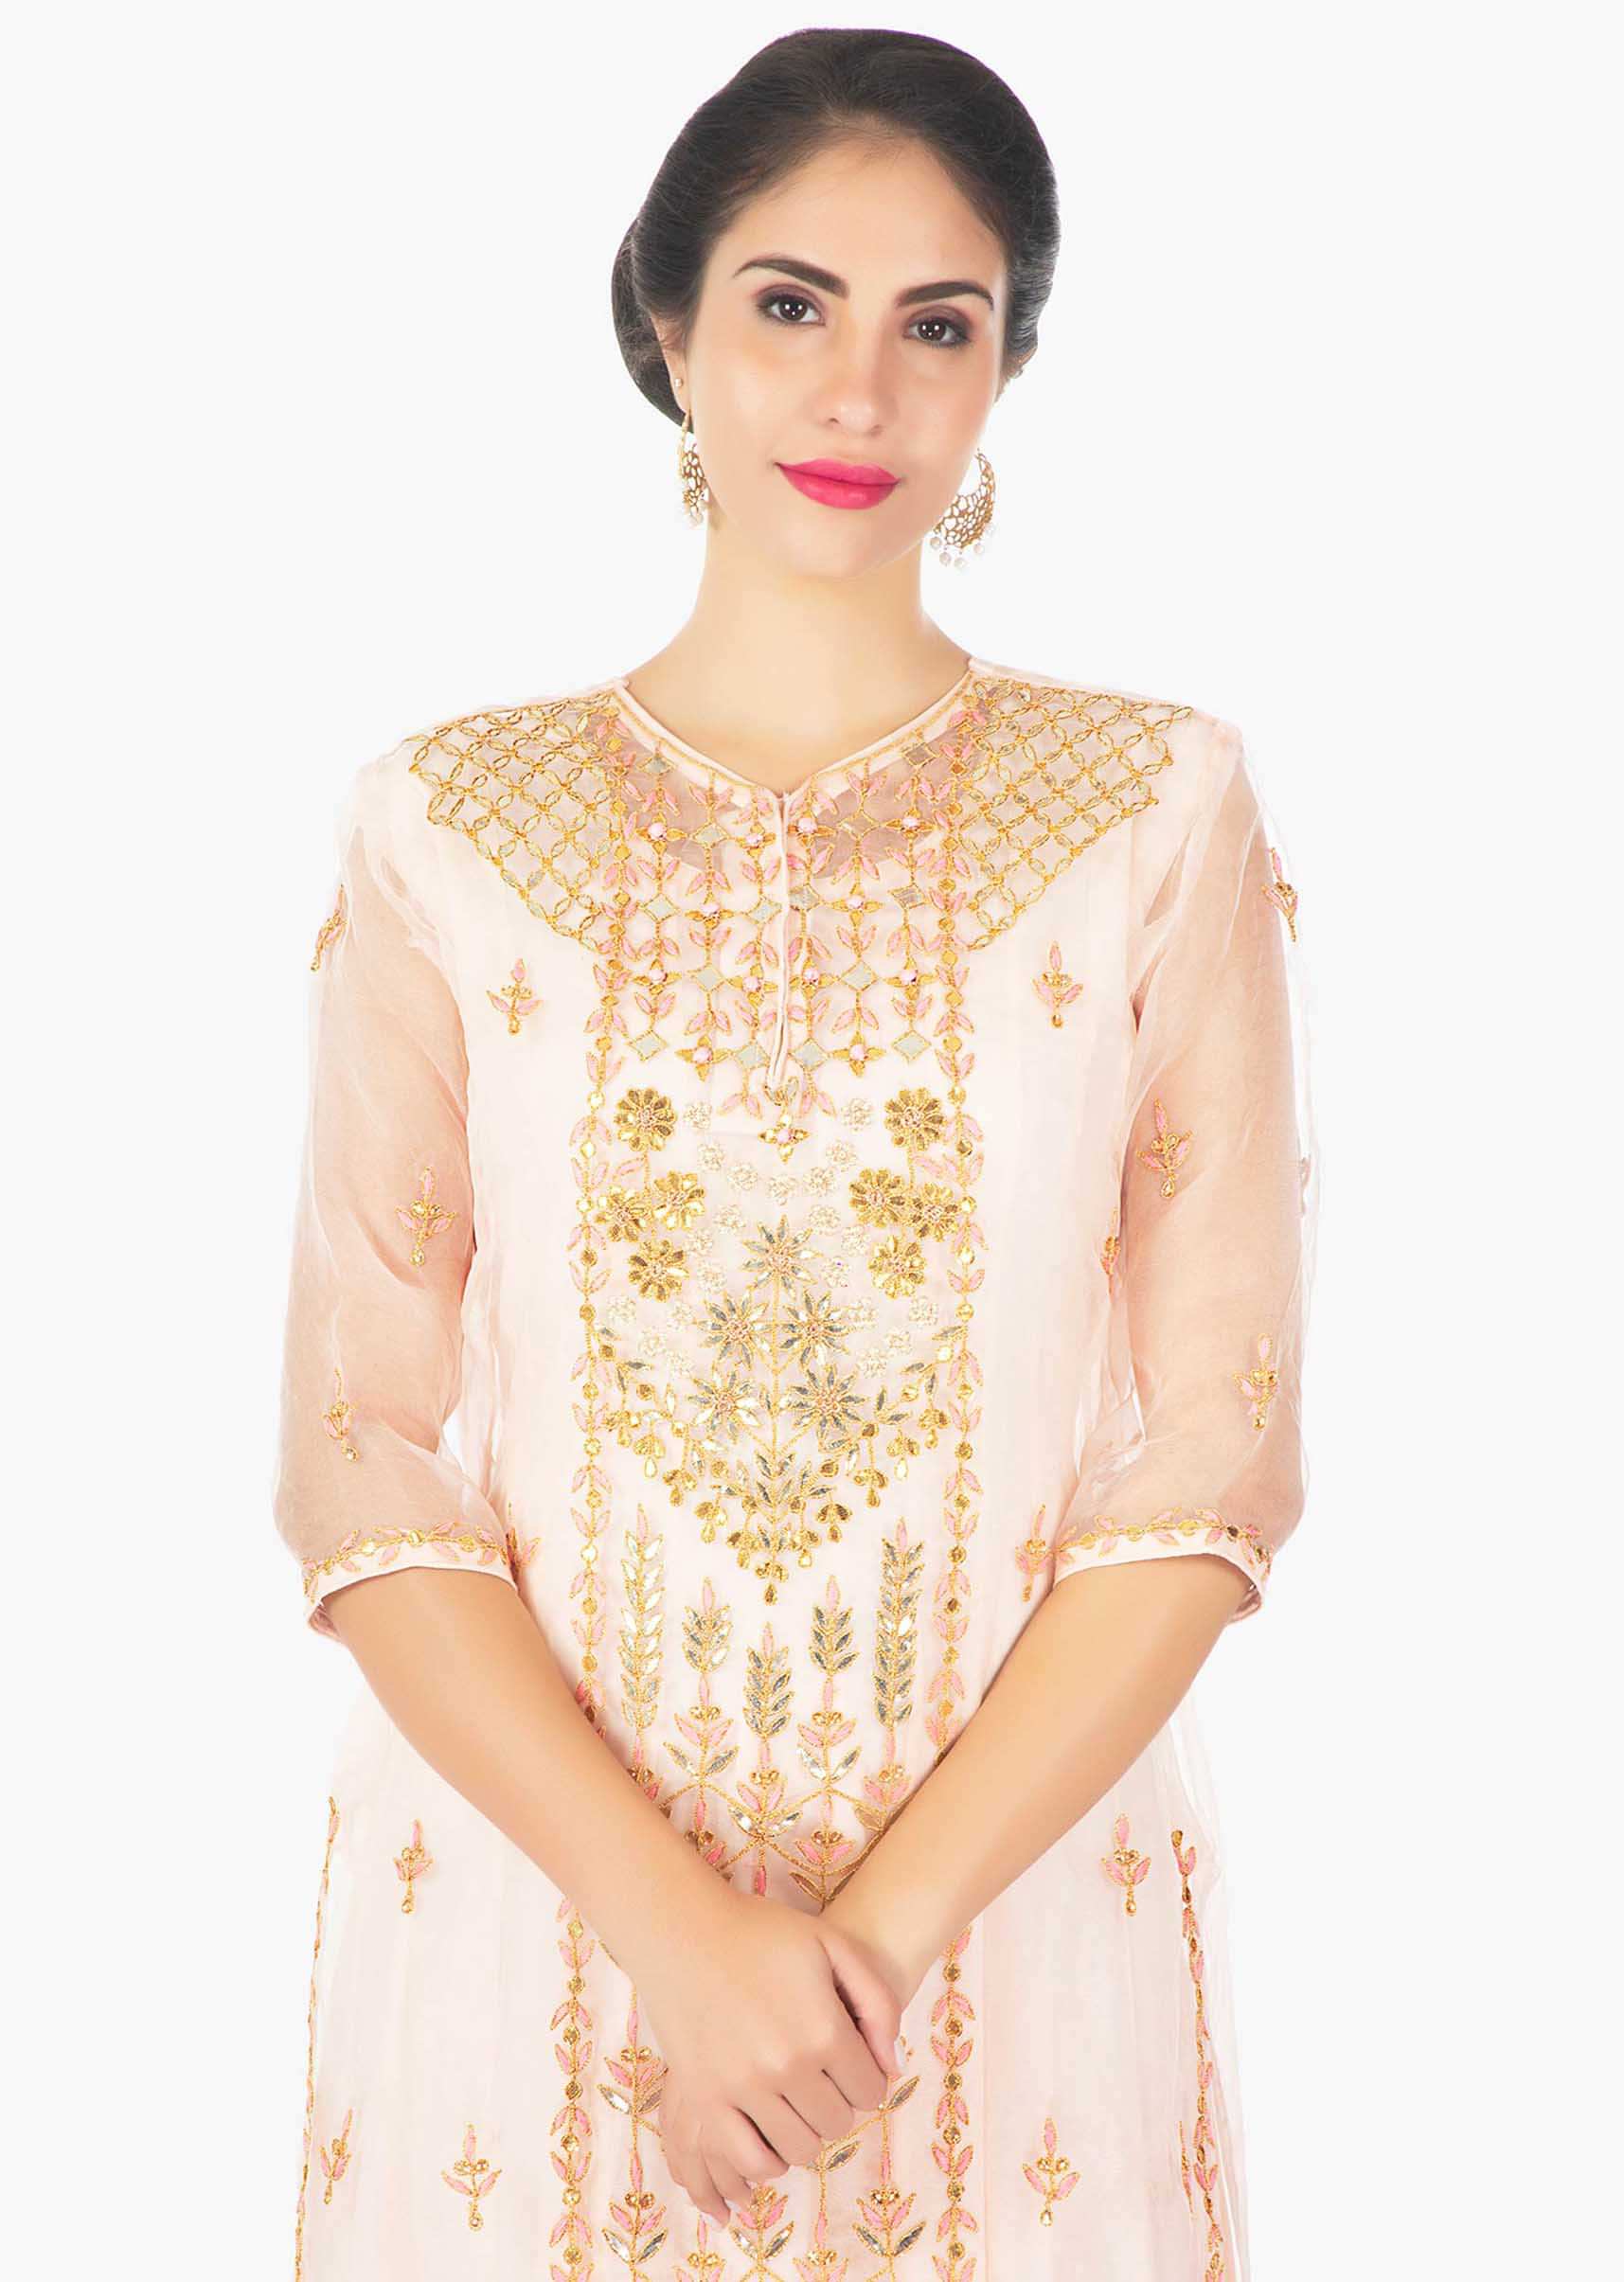 Cantaloupe peach cotton inners with organza top in gotta lace and resham